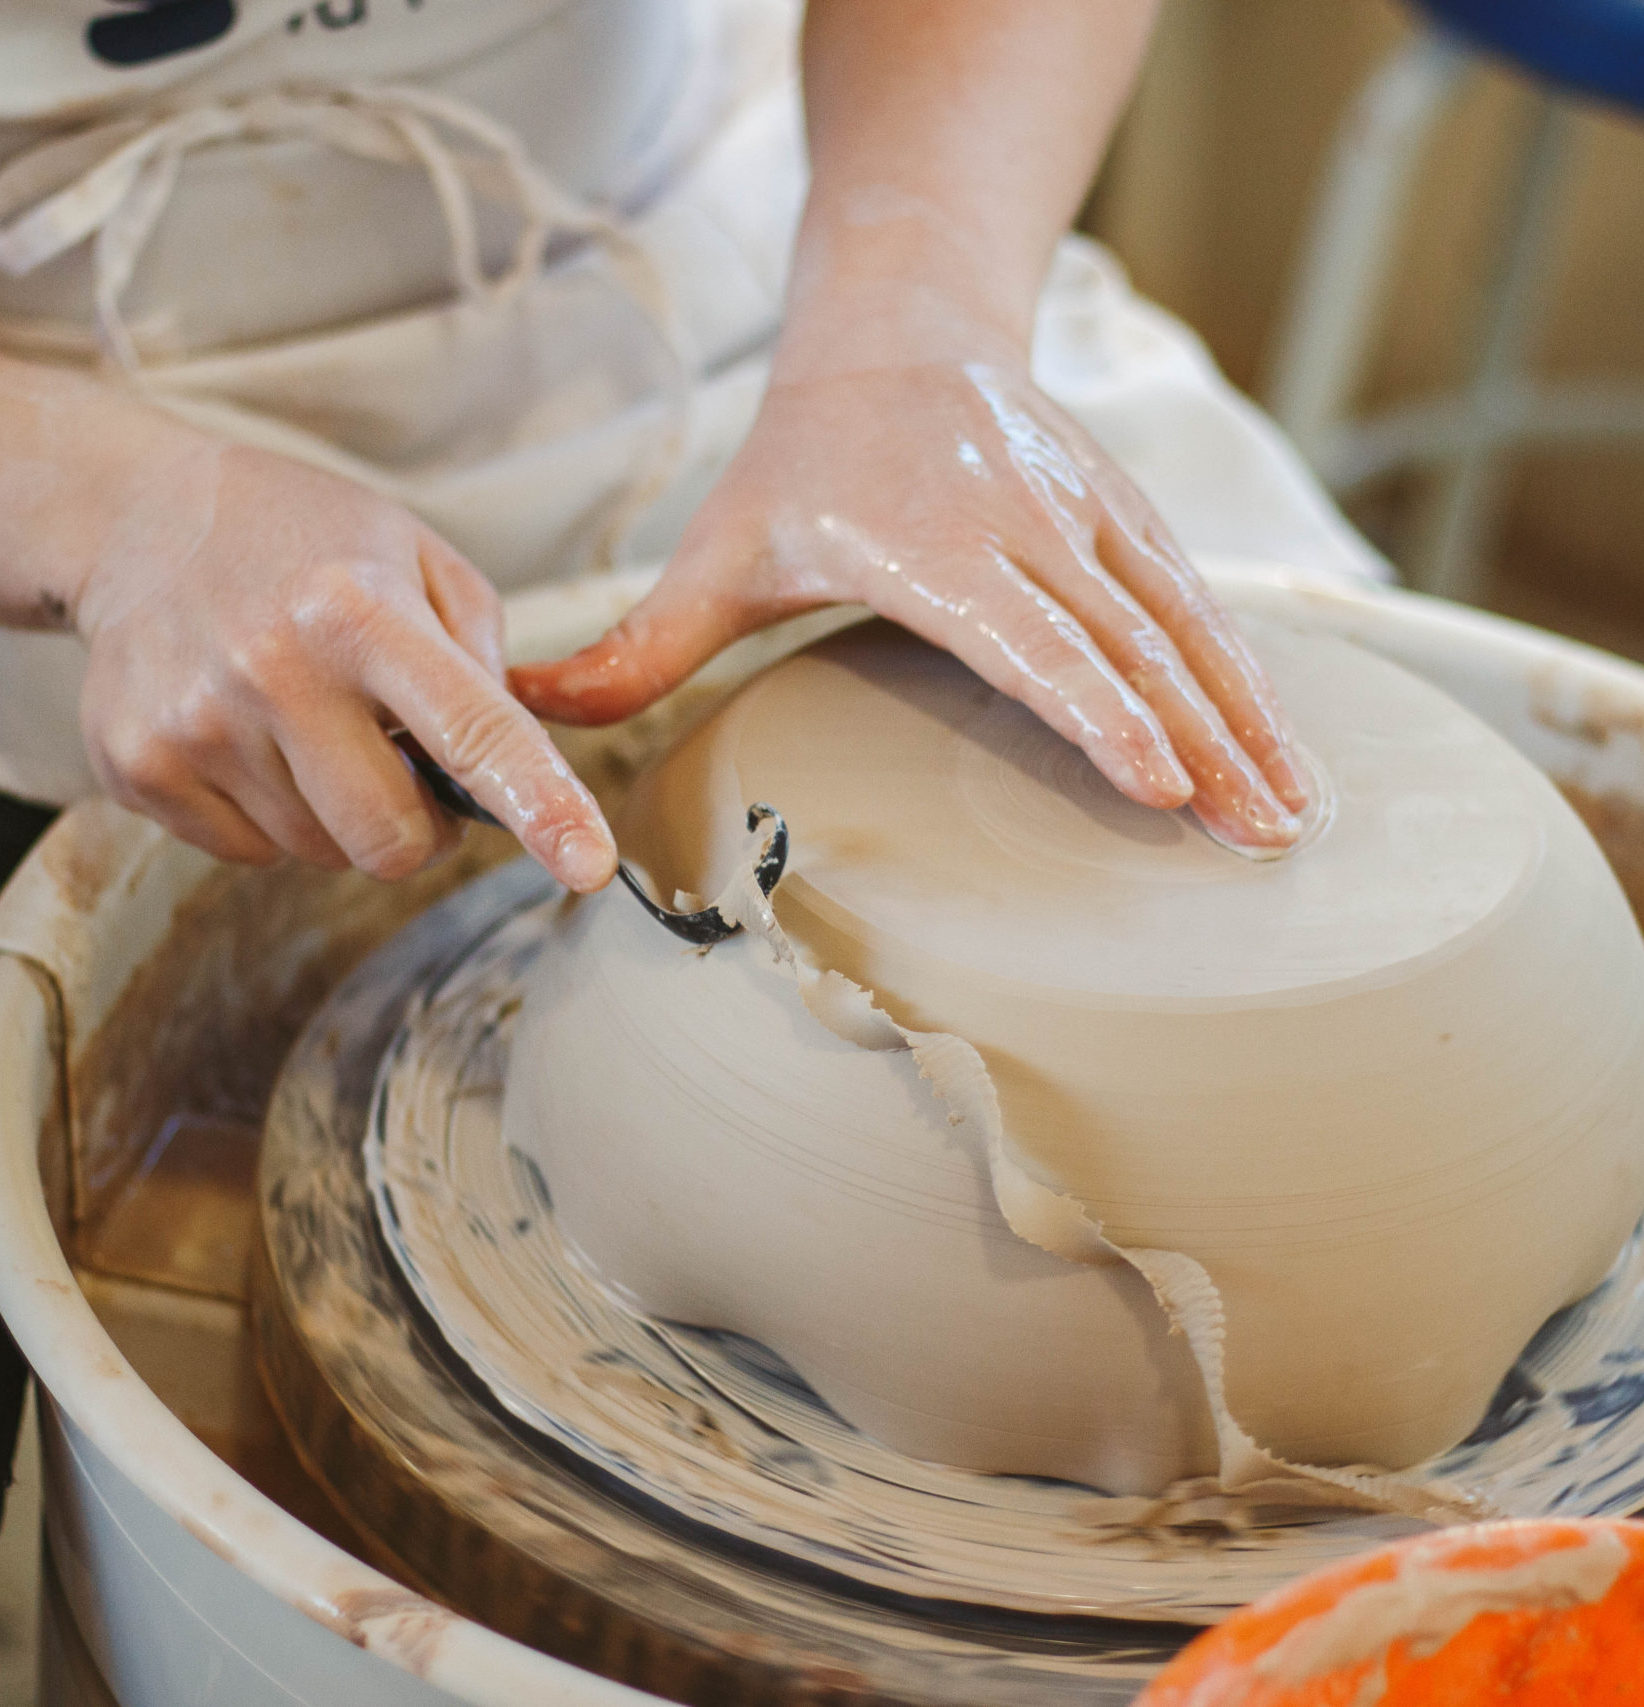 Tools being used on clay bowl